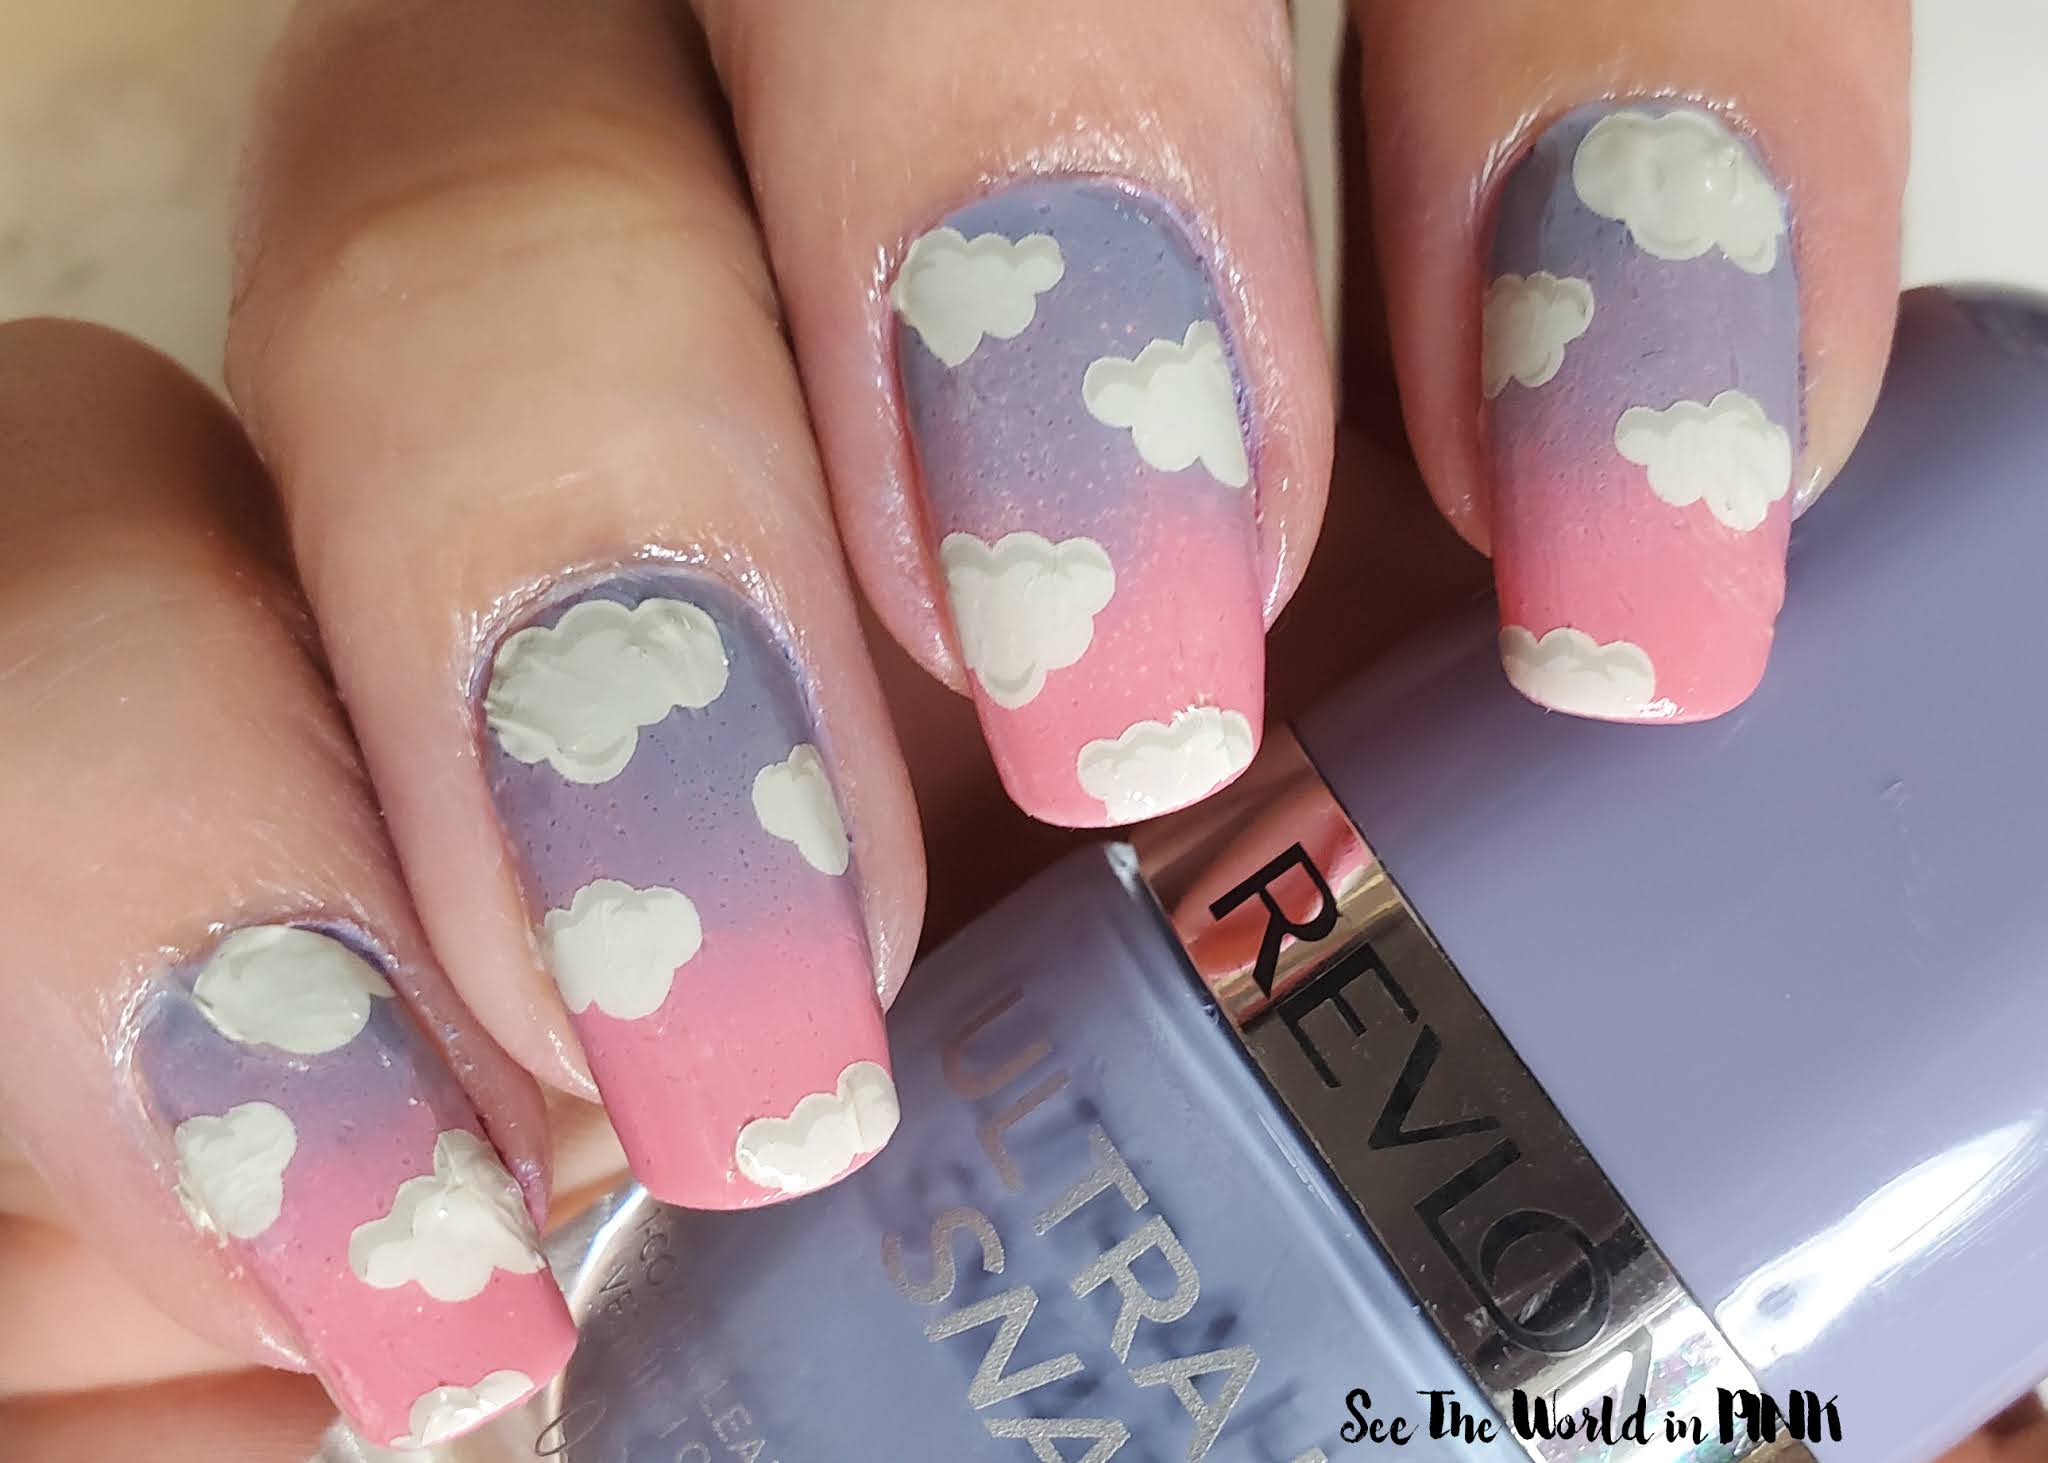 Manicure Monday - Summer Skies Nails